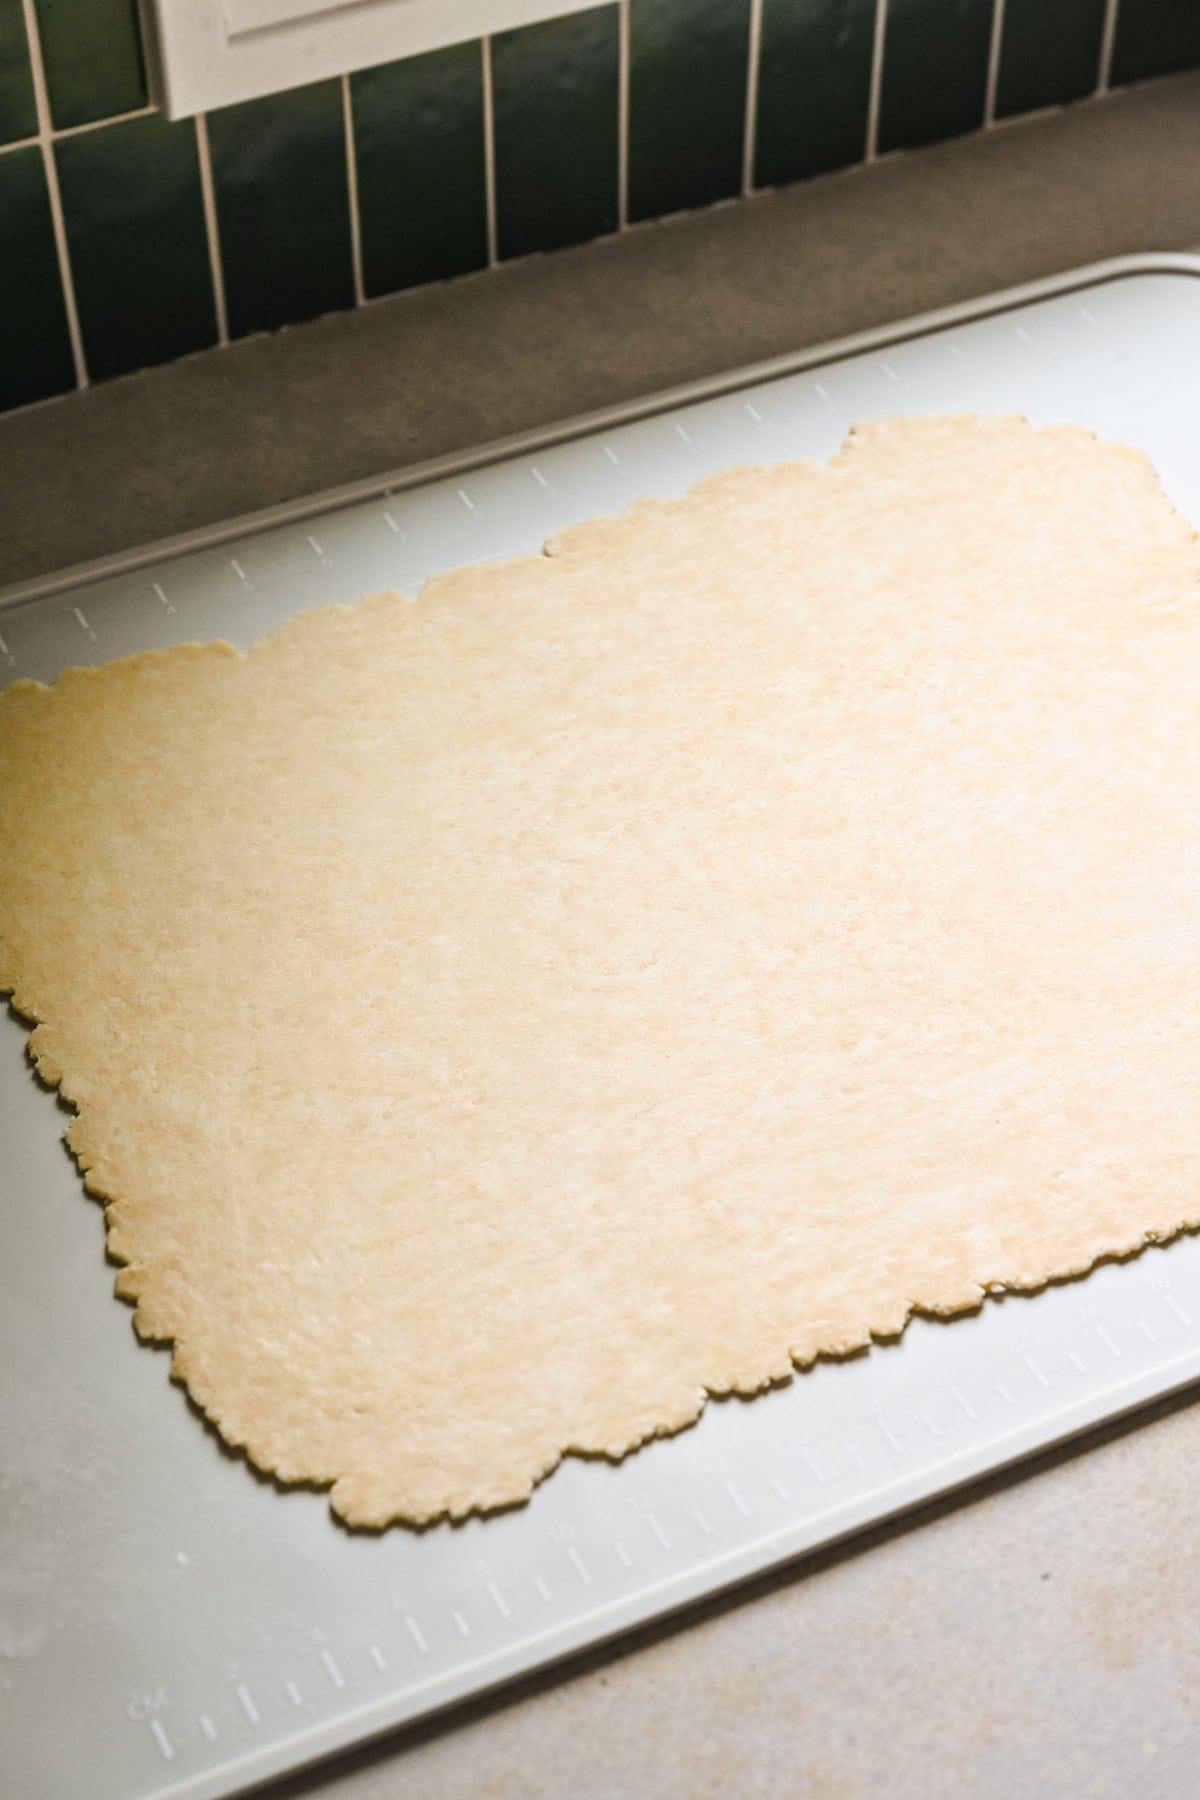 Overhead view of pop tart dough after being rolled out.